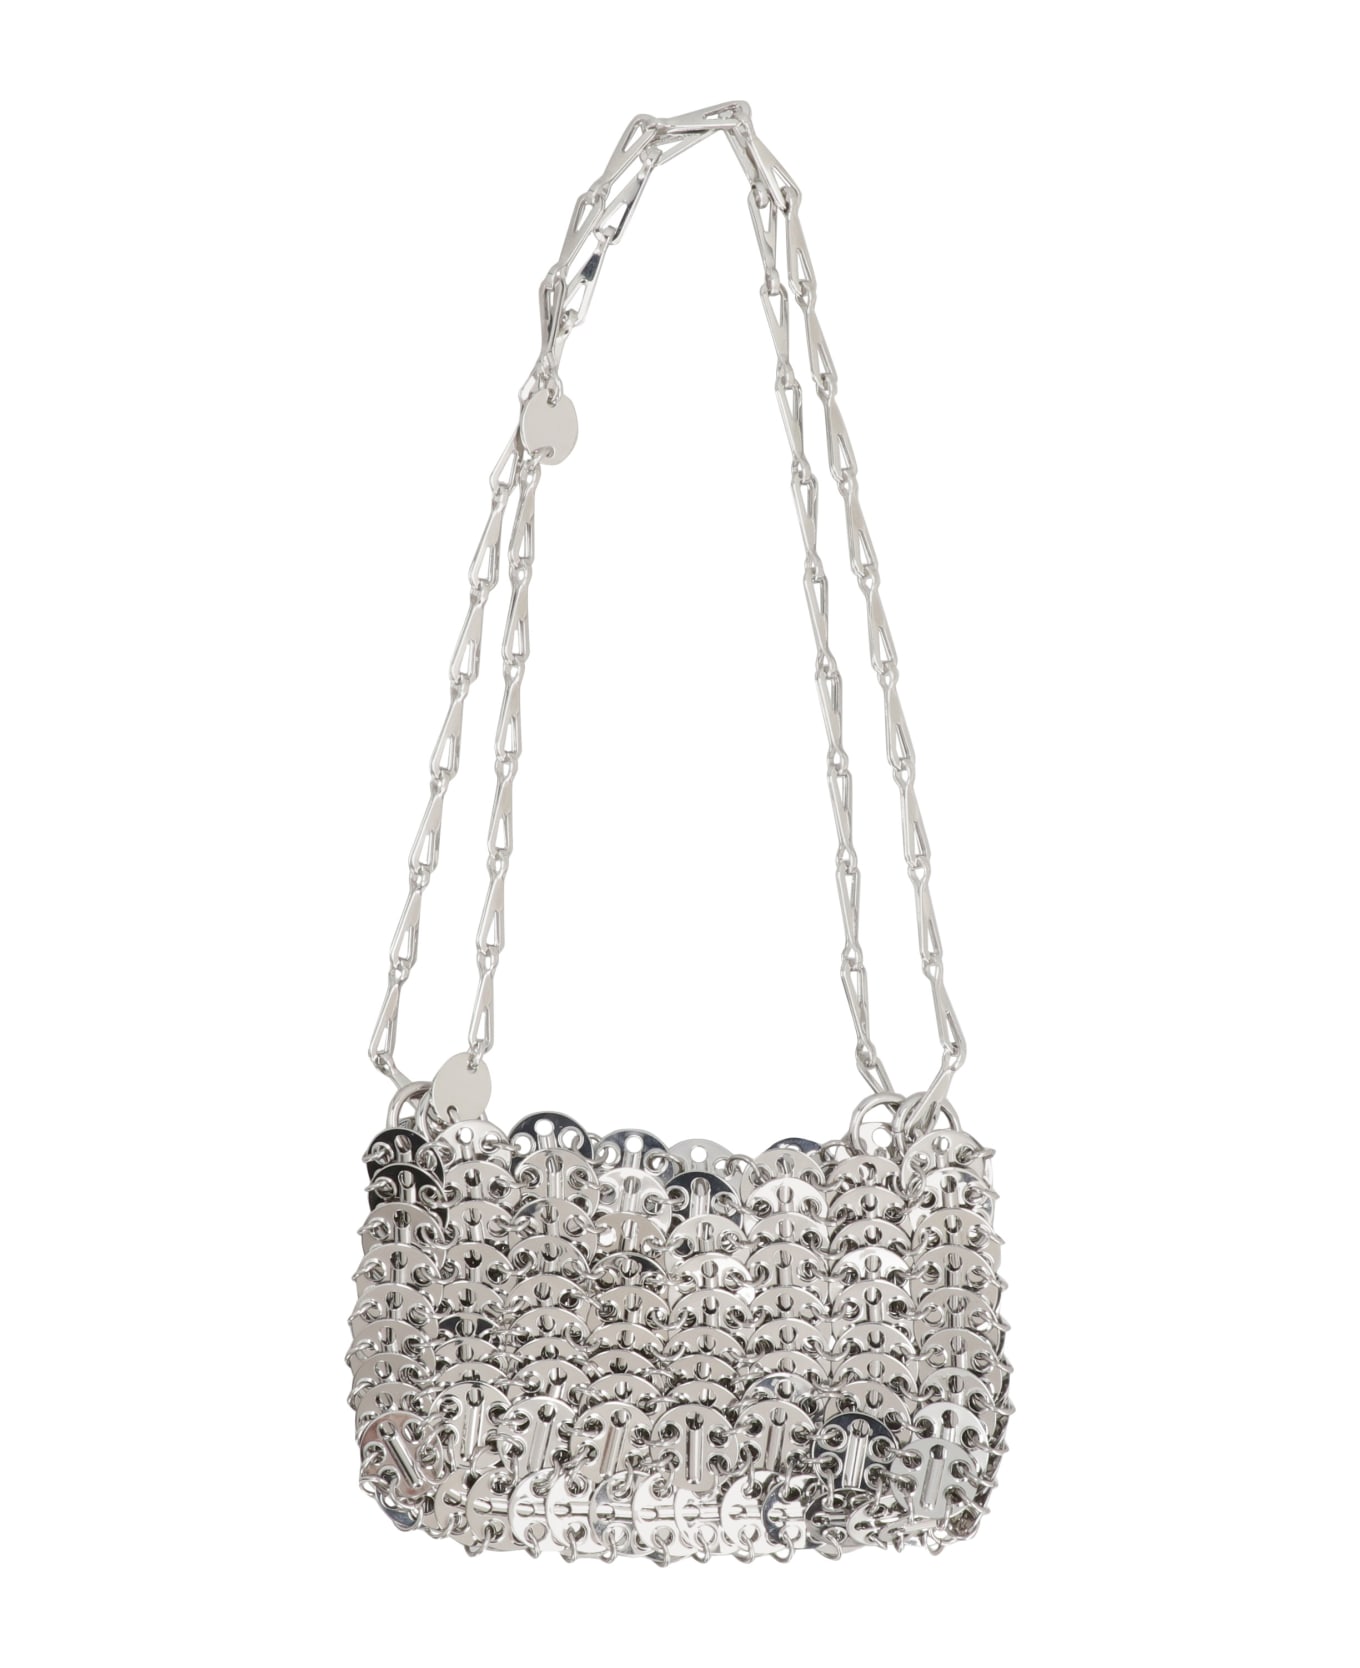 Paco Rabanne Silver Iconic 1969 Nano Bag - Silver クラッチバッグ